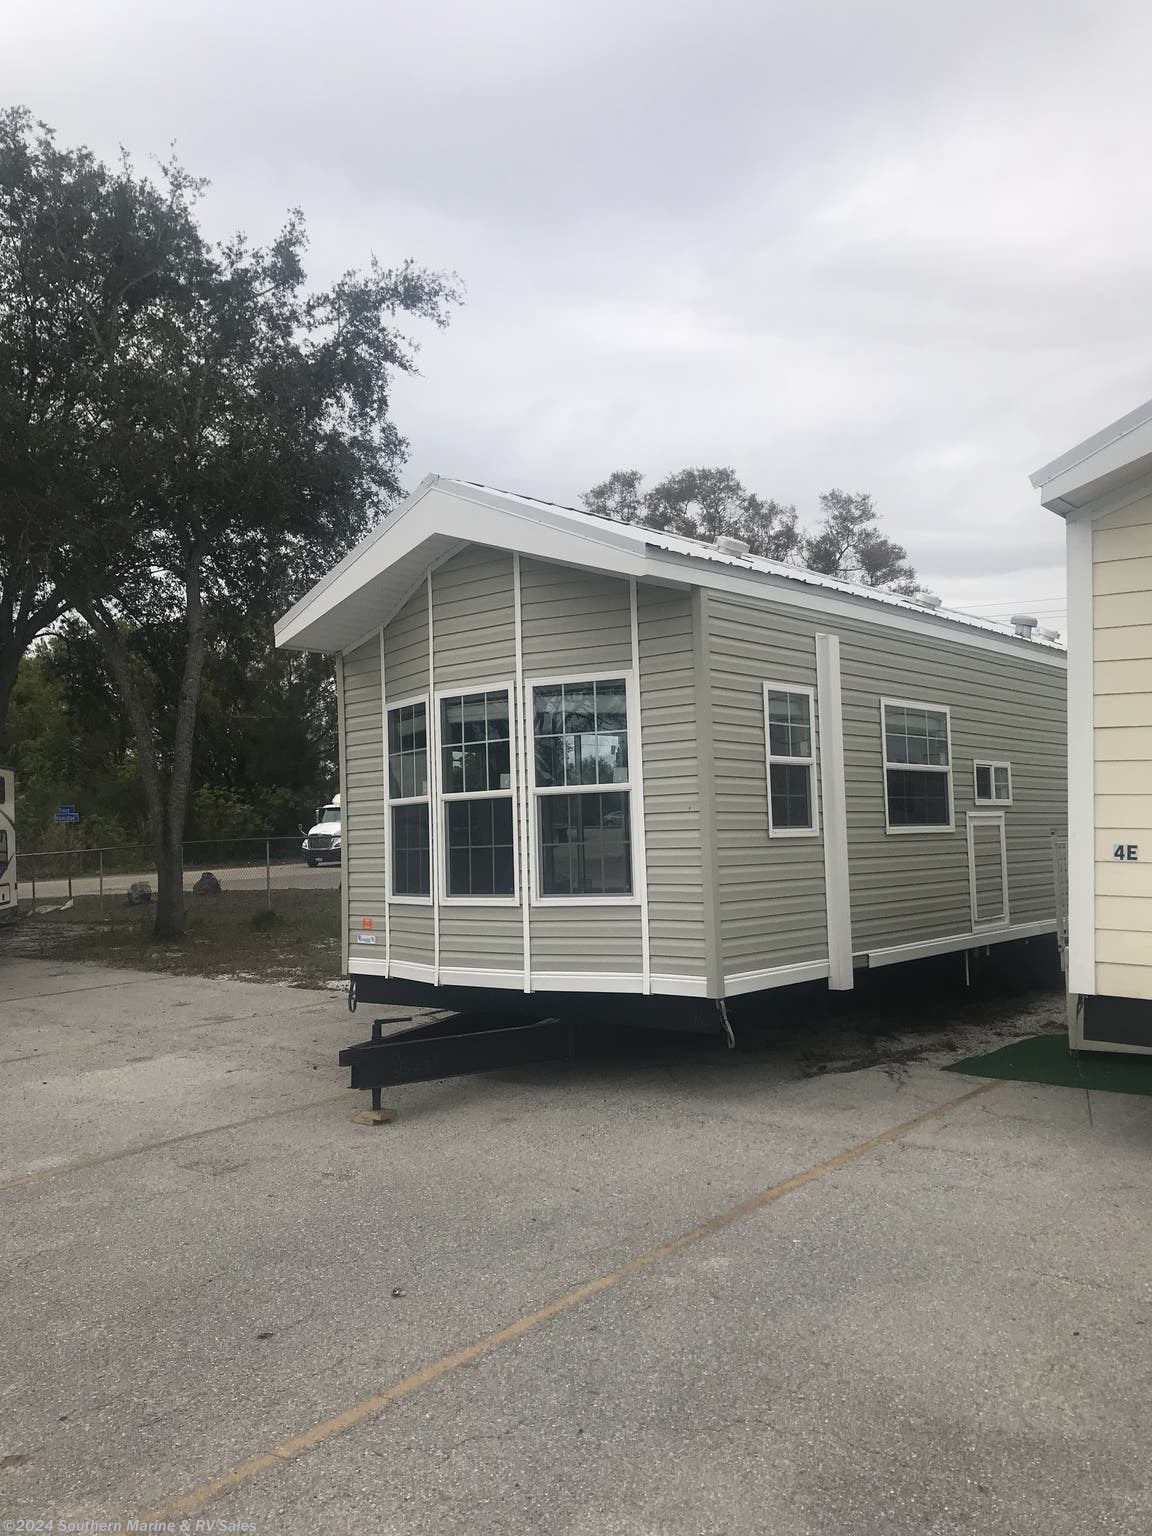 2019 Chariot Eagle Rv Eagle Series 314 For Sale In Ft Myers Fl